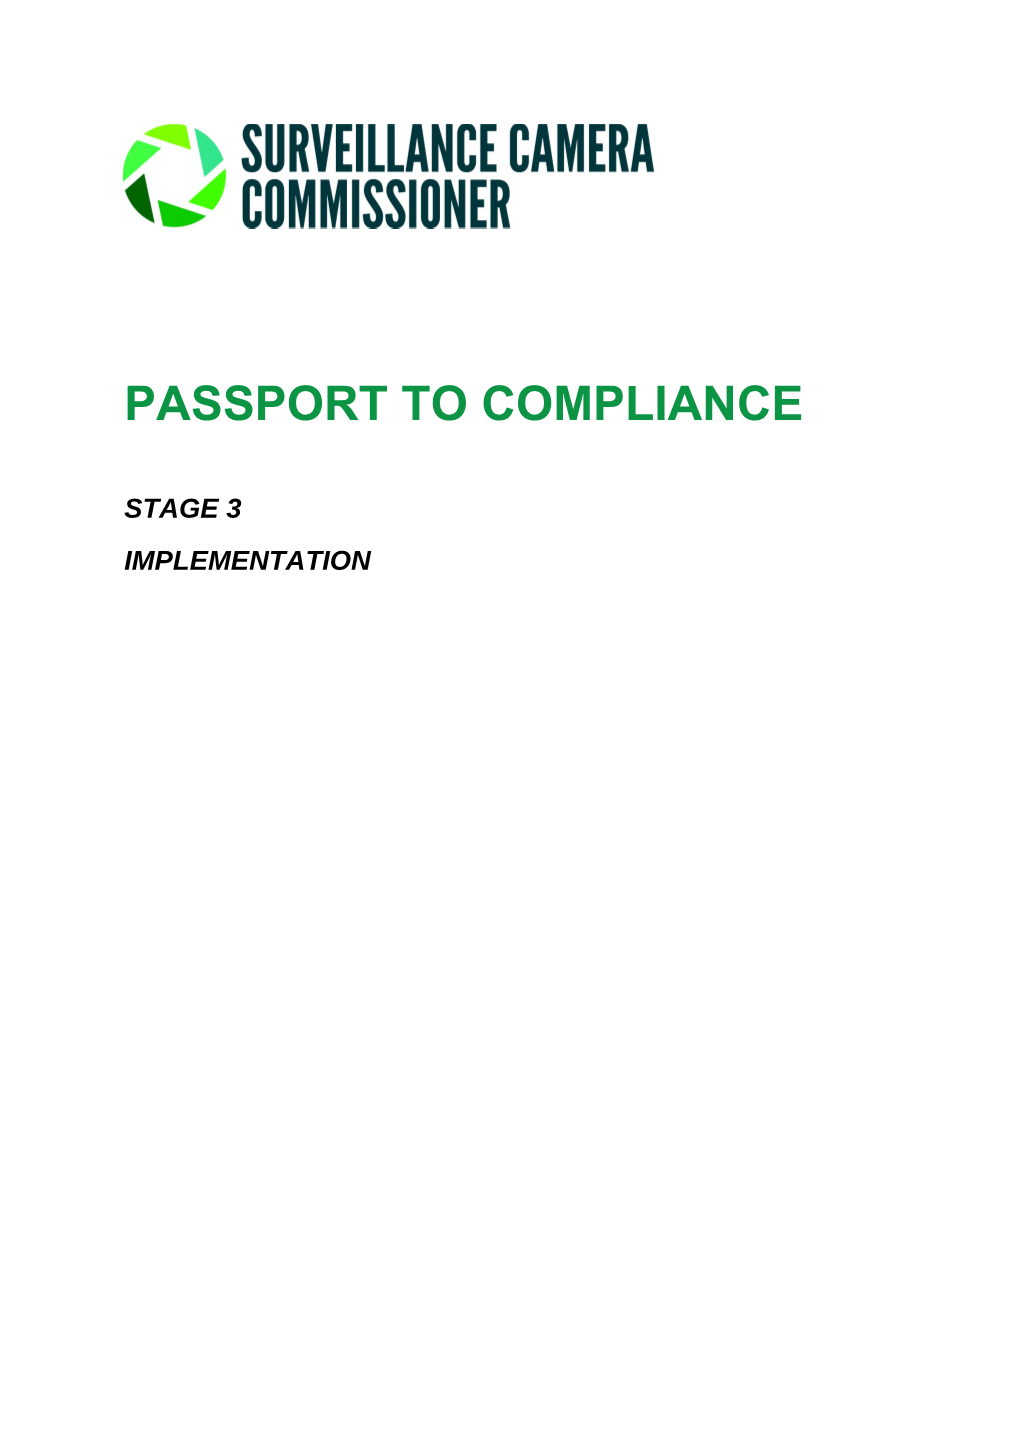 Passport to Compliance. Stage 3 - Implementation